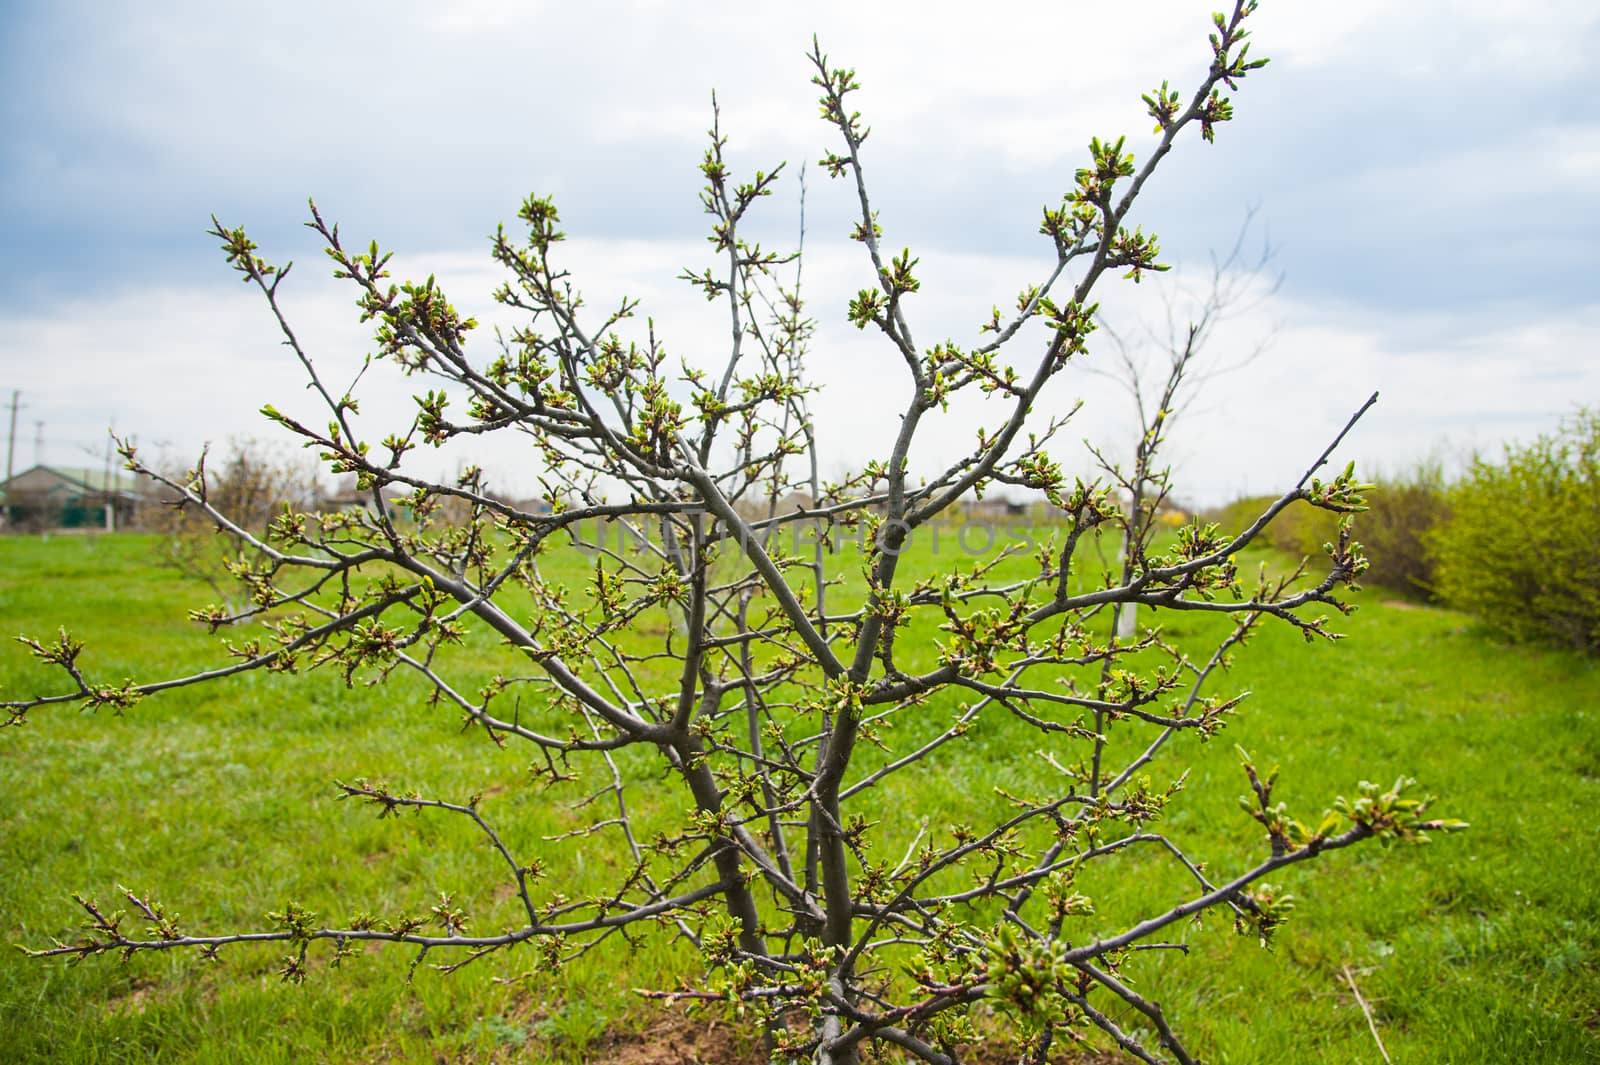 Green buds on branches in spring by grigorenko